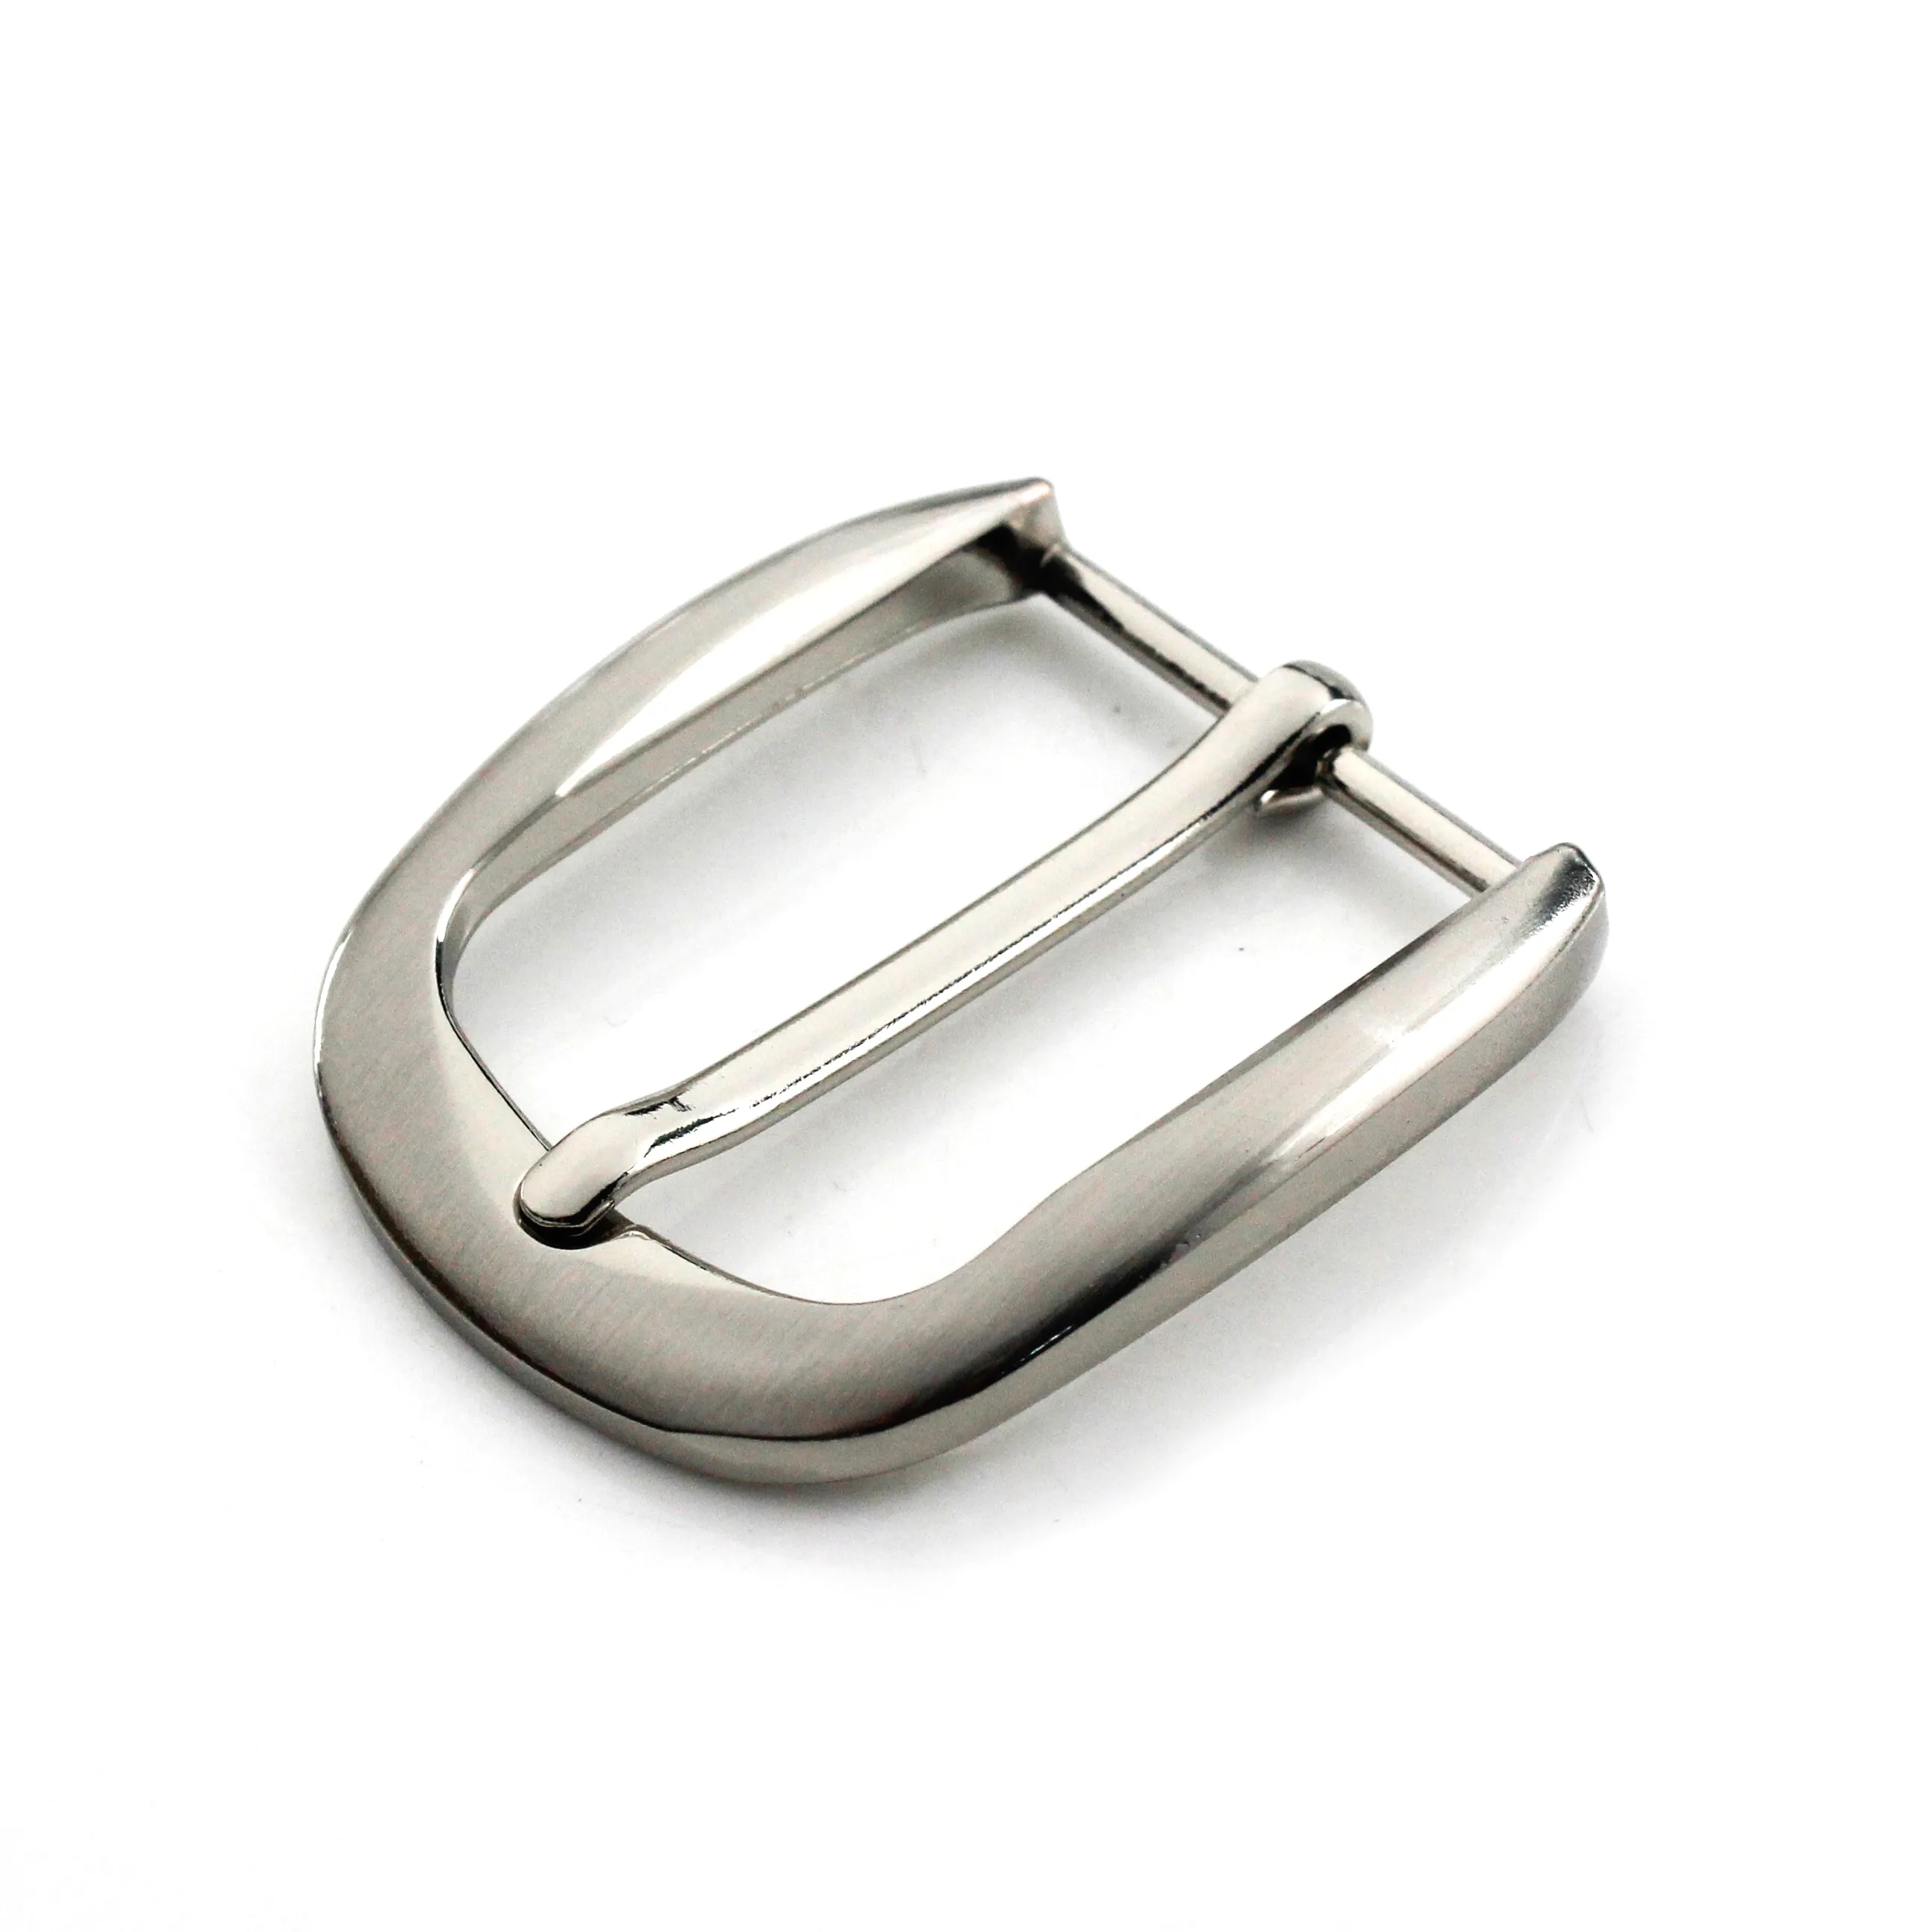 CLOXY 35mm Fashion Belt Buckle for Men High Quality Alloy Belt Accessories Clasp Pin Buckle Belt Buckle